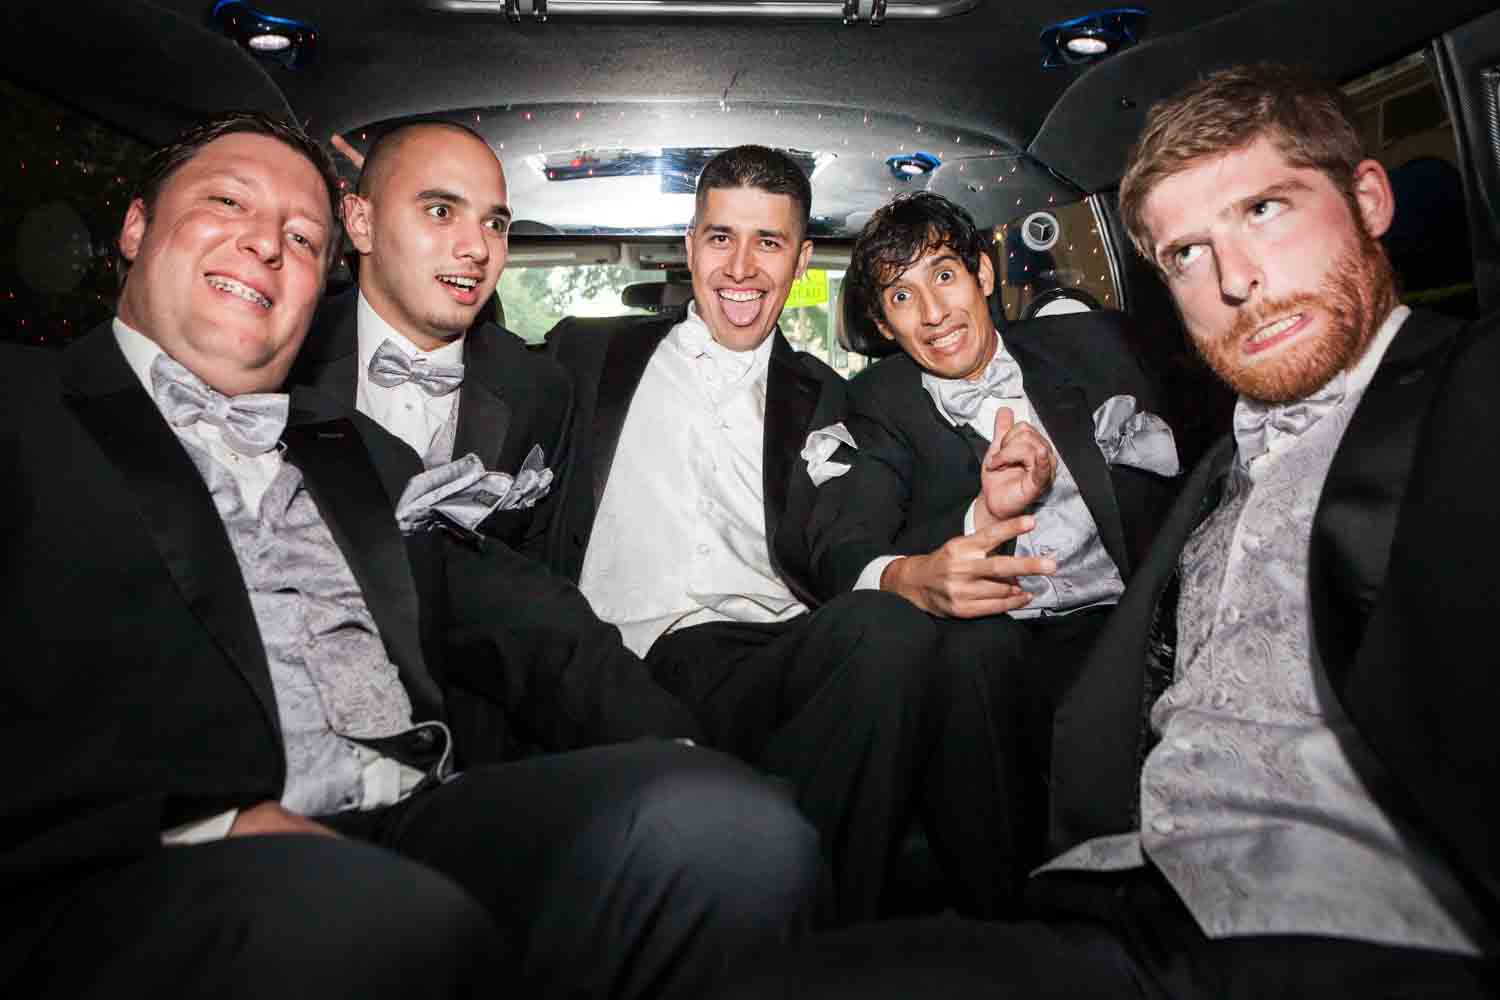 Groom and groomsmen making funny faces in the back of a limo